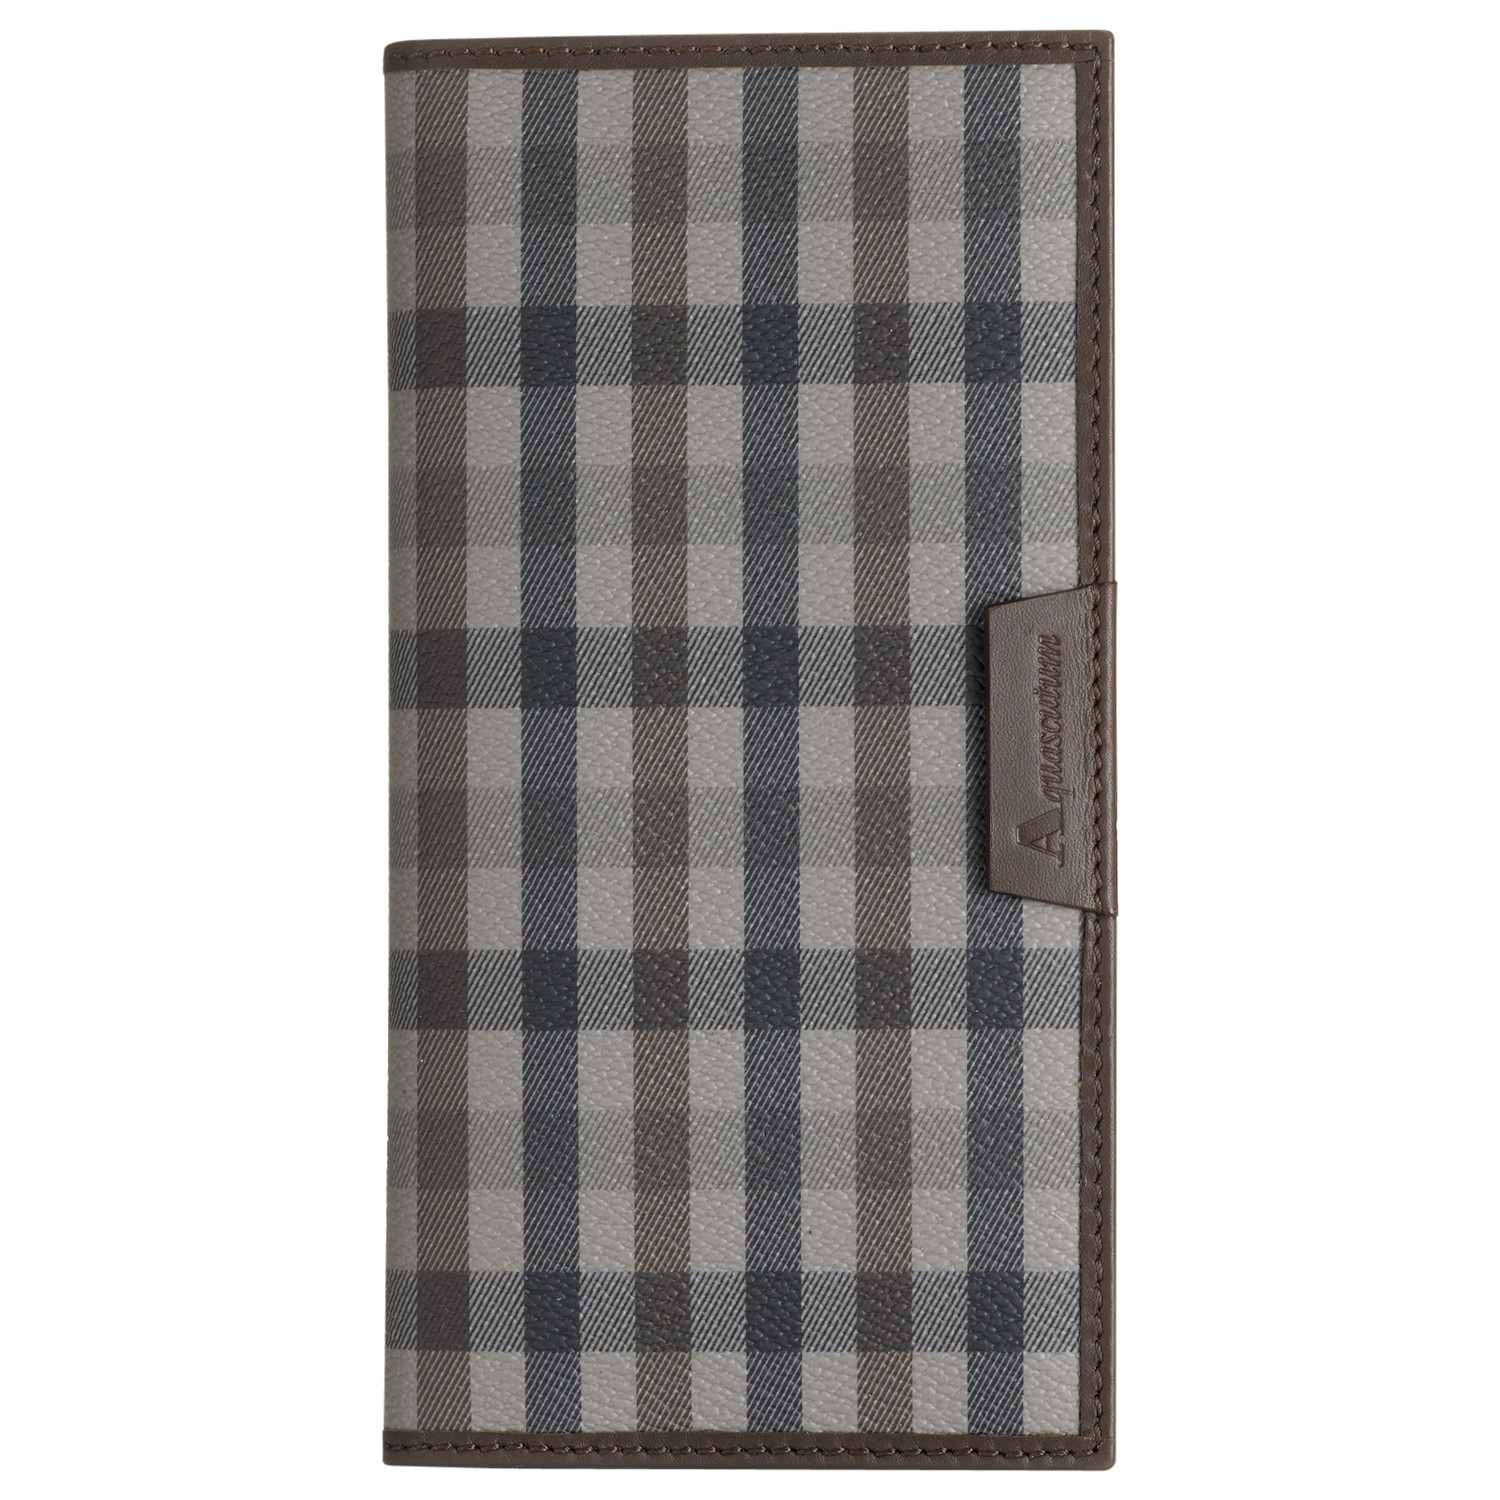 Aquascutum Large Club Check Wallet in Brown for Men - Lyst